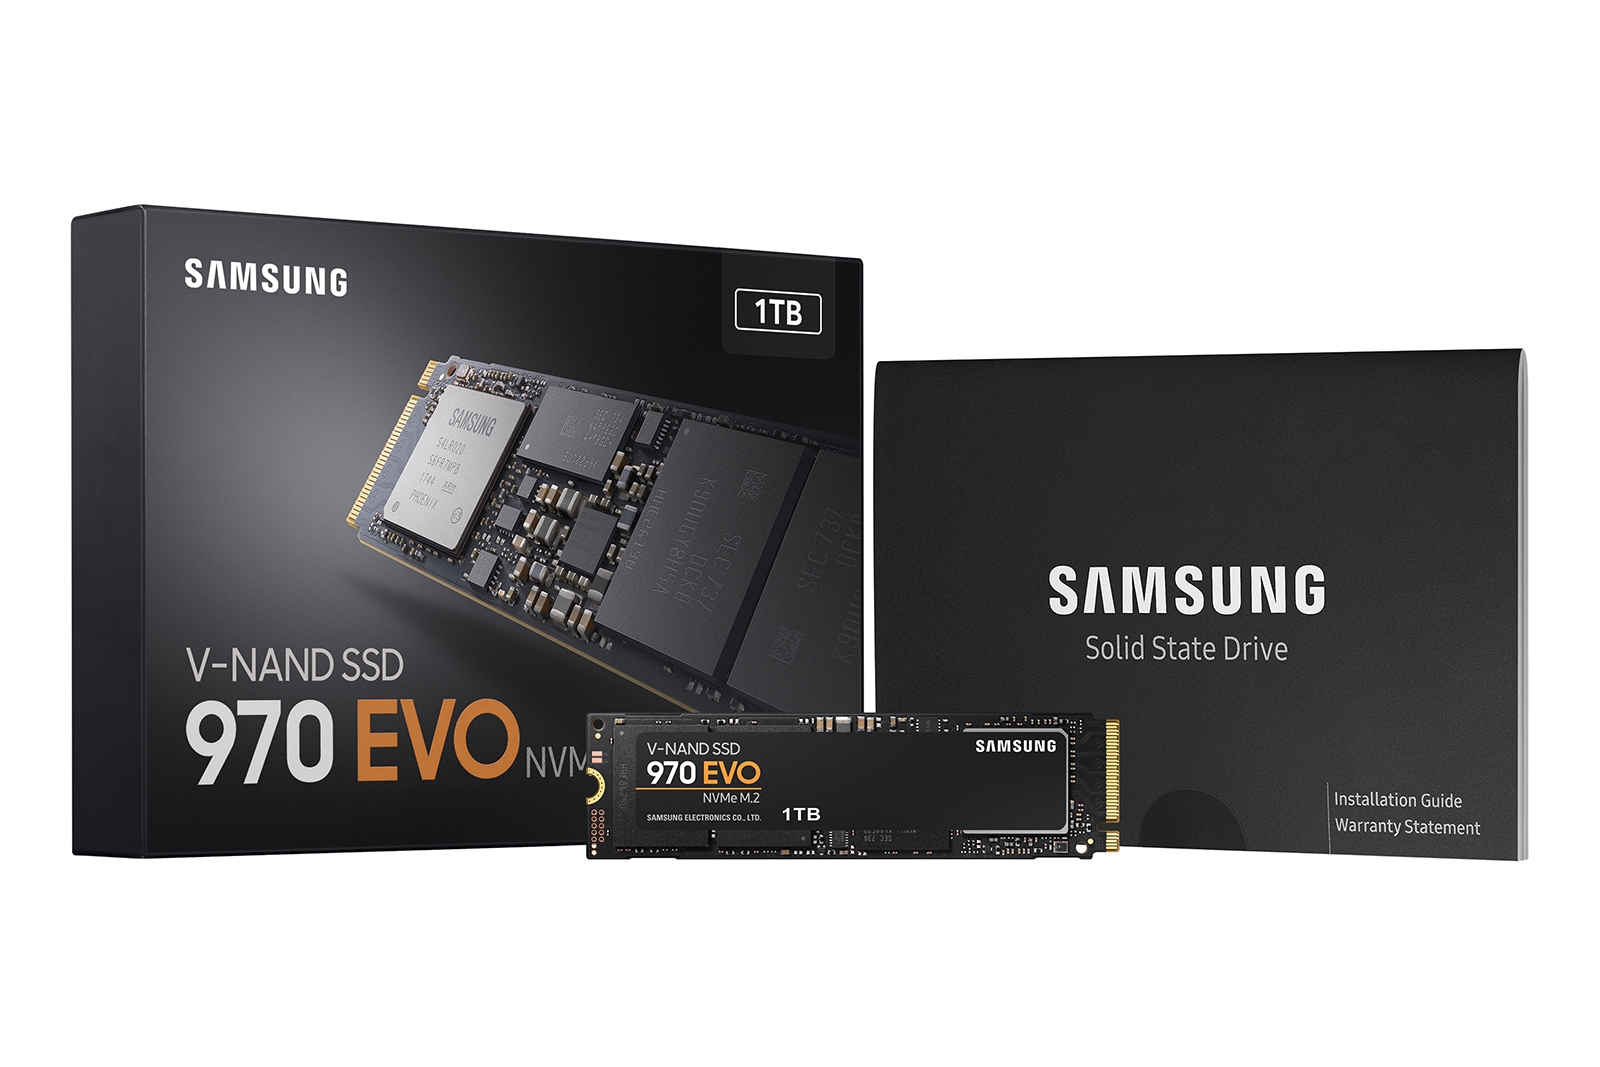 SAMSUNG 970 EVO SSD 1TB - M.2 NVMe Interface Internal Solid State Drive +  2mo Adobe CC Photography with V-NAND Technology (MZ-V7E1T0BW), Black/Red